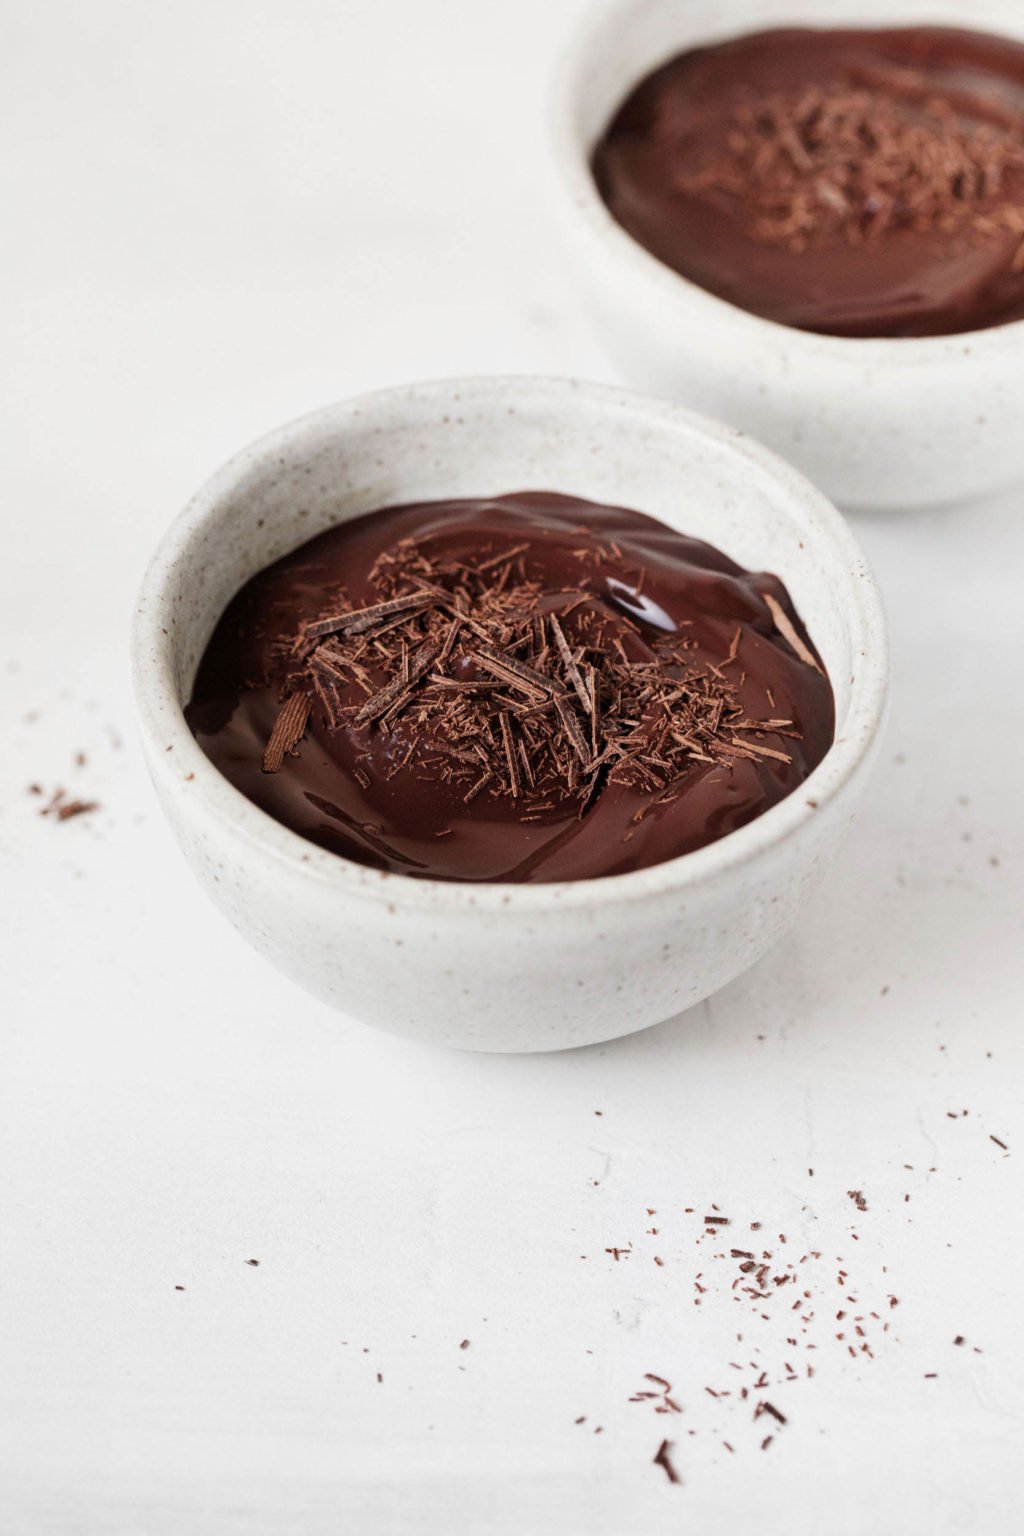 Two small, gray ceramic bowls are filled with a rich, deep mocha colored cashew chocolate pudding and chocolate shavings.